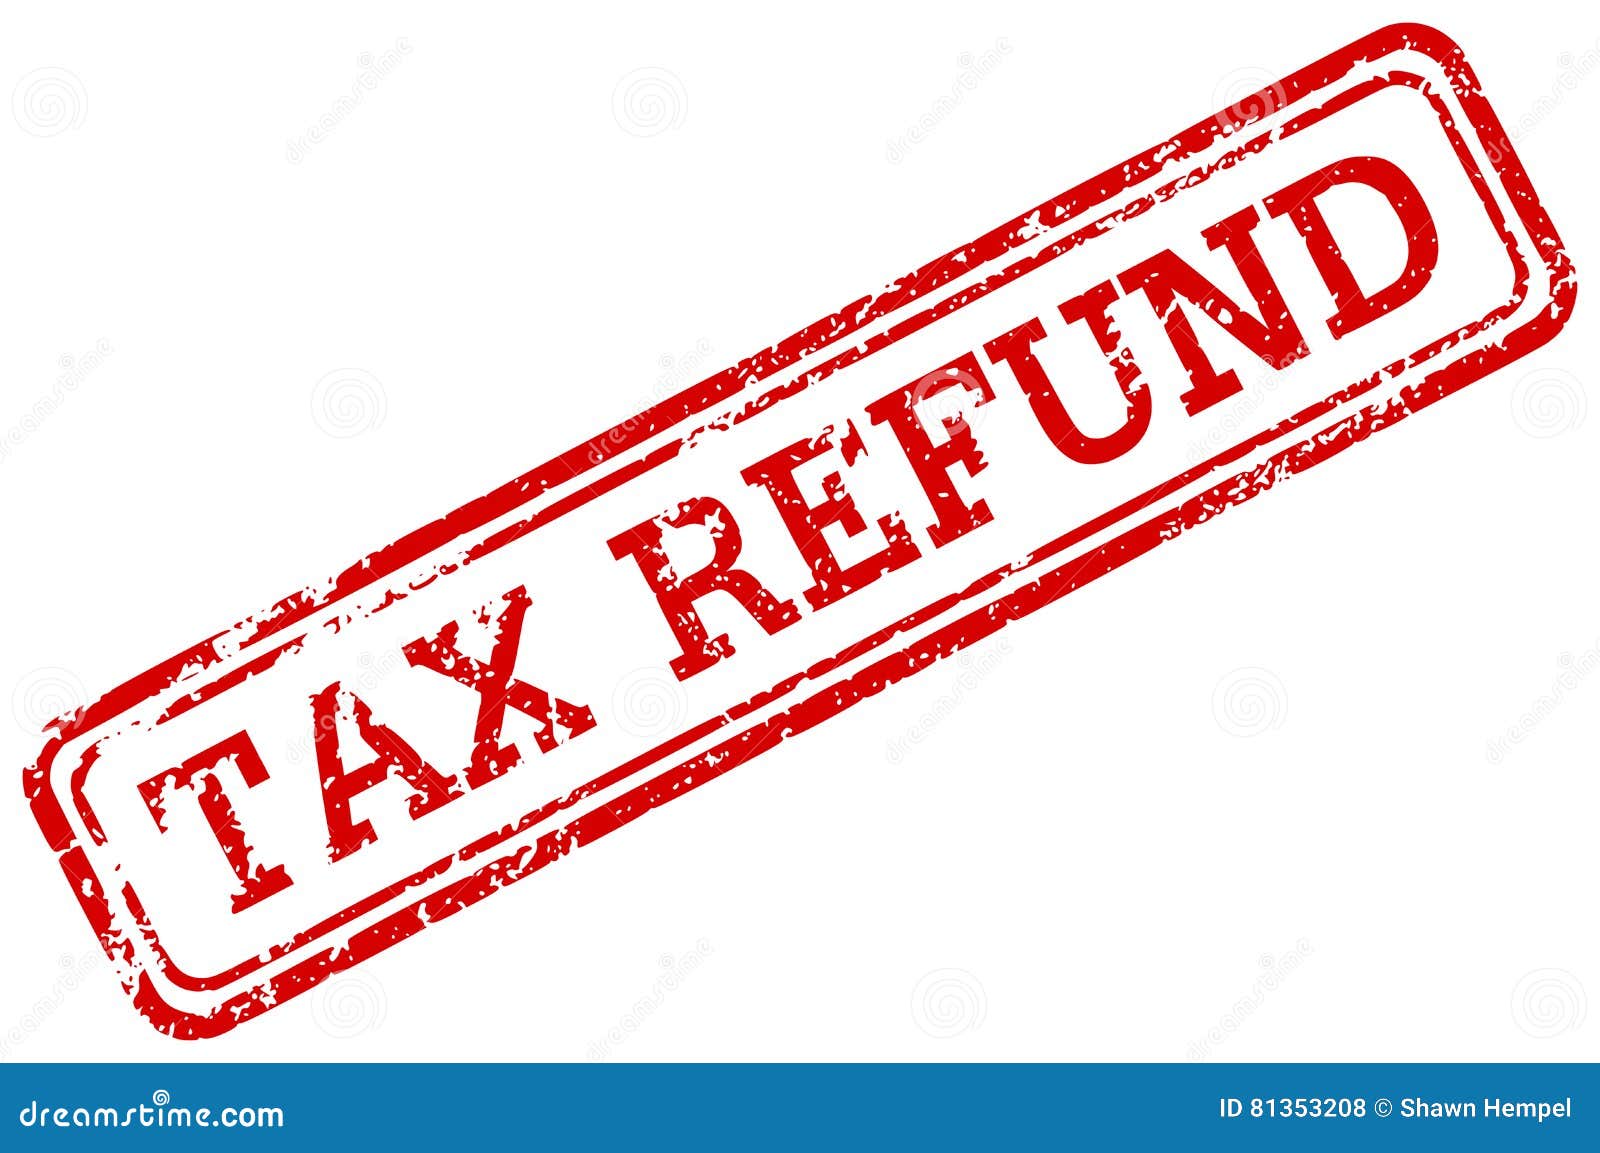 tax-refund-red-rubber-stamp-stock-illustration-illustration-of